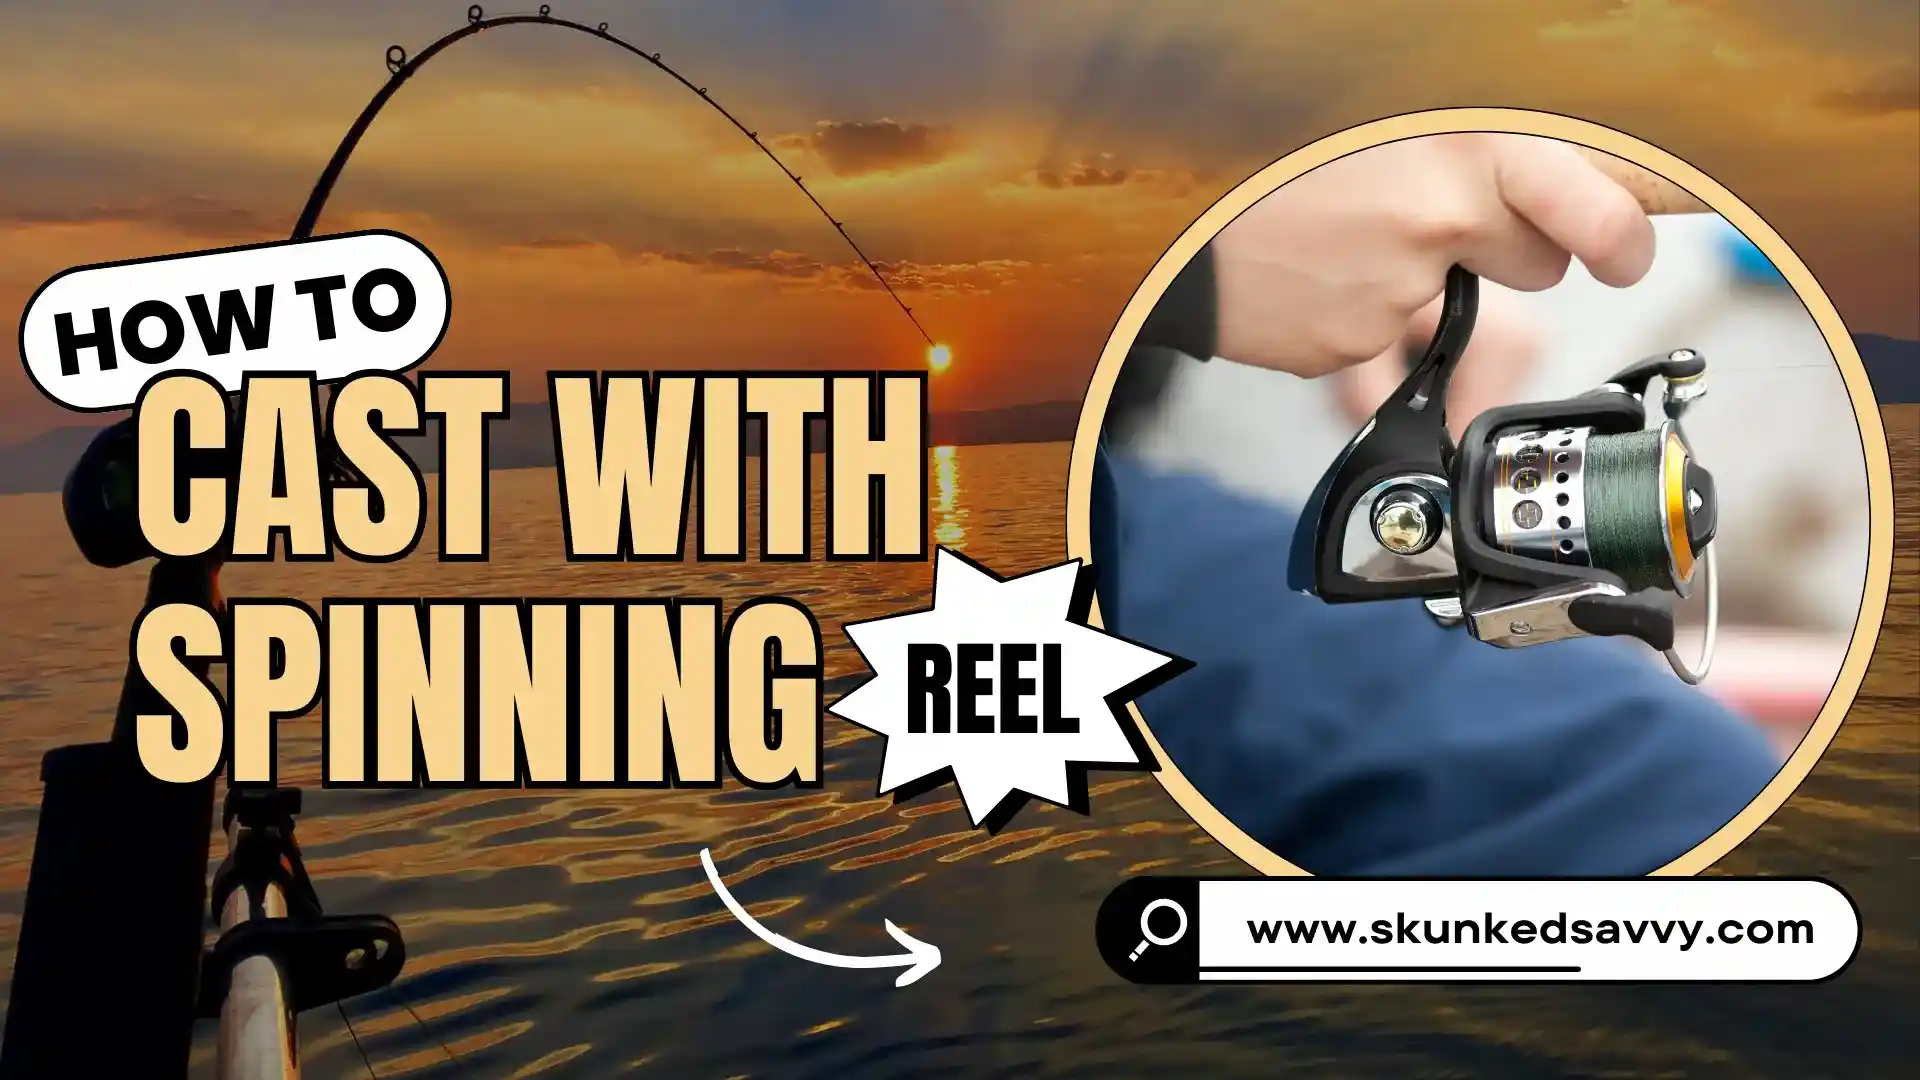 How to Cast with Spinning Reel